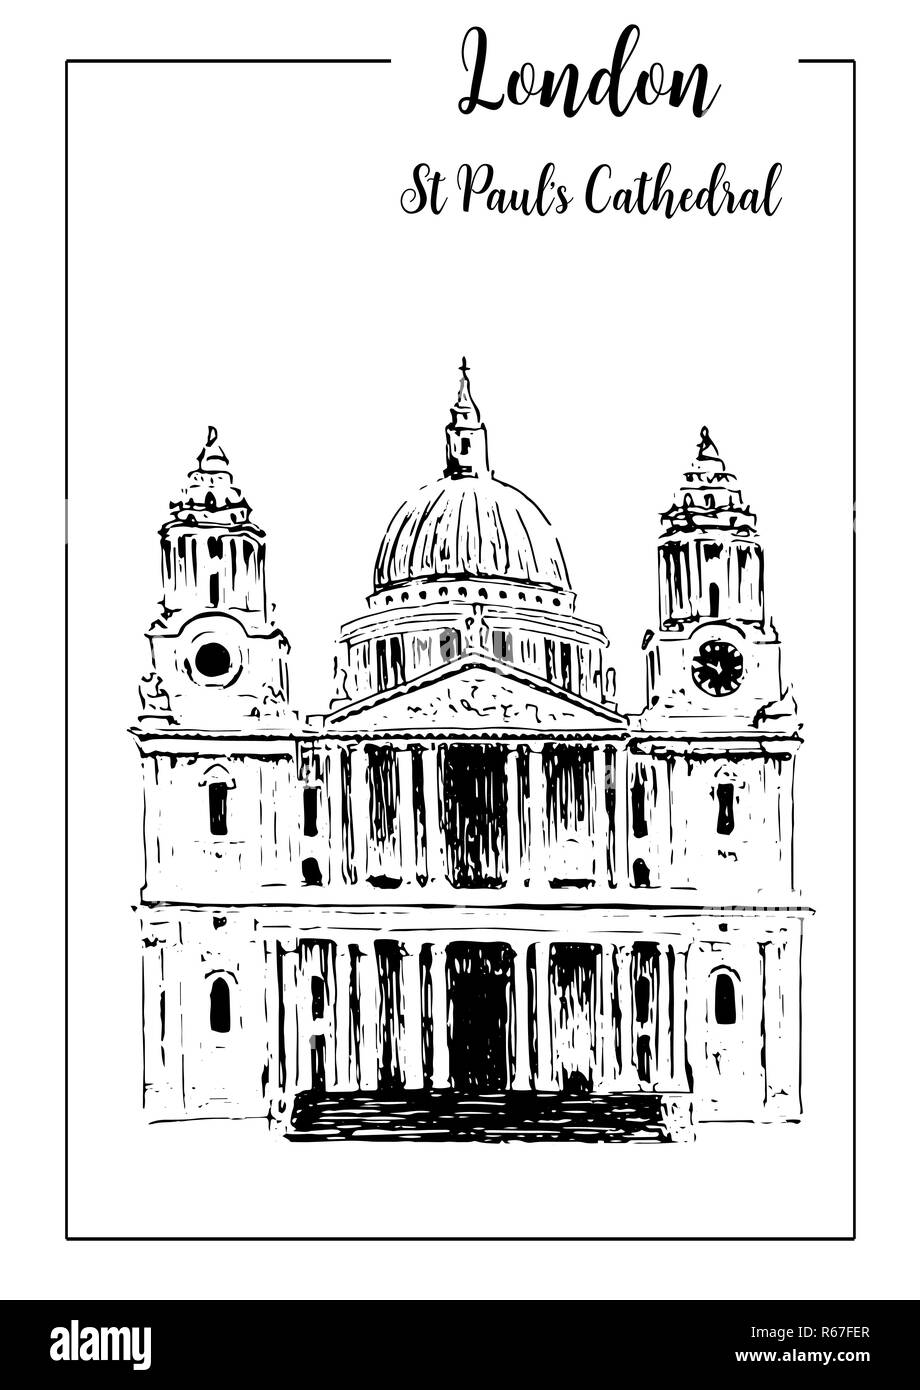 London symbol St. Paul's Cathedral. Beautiful hand drawn vector sketch illustration. Stock Photo